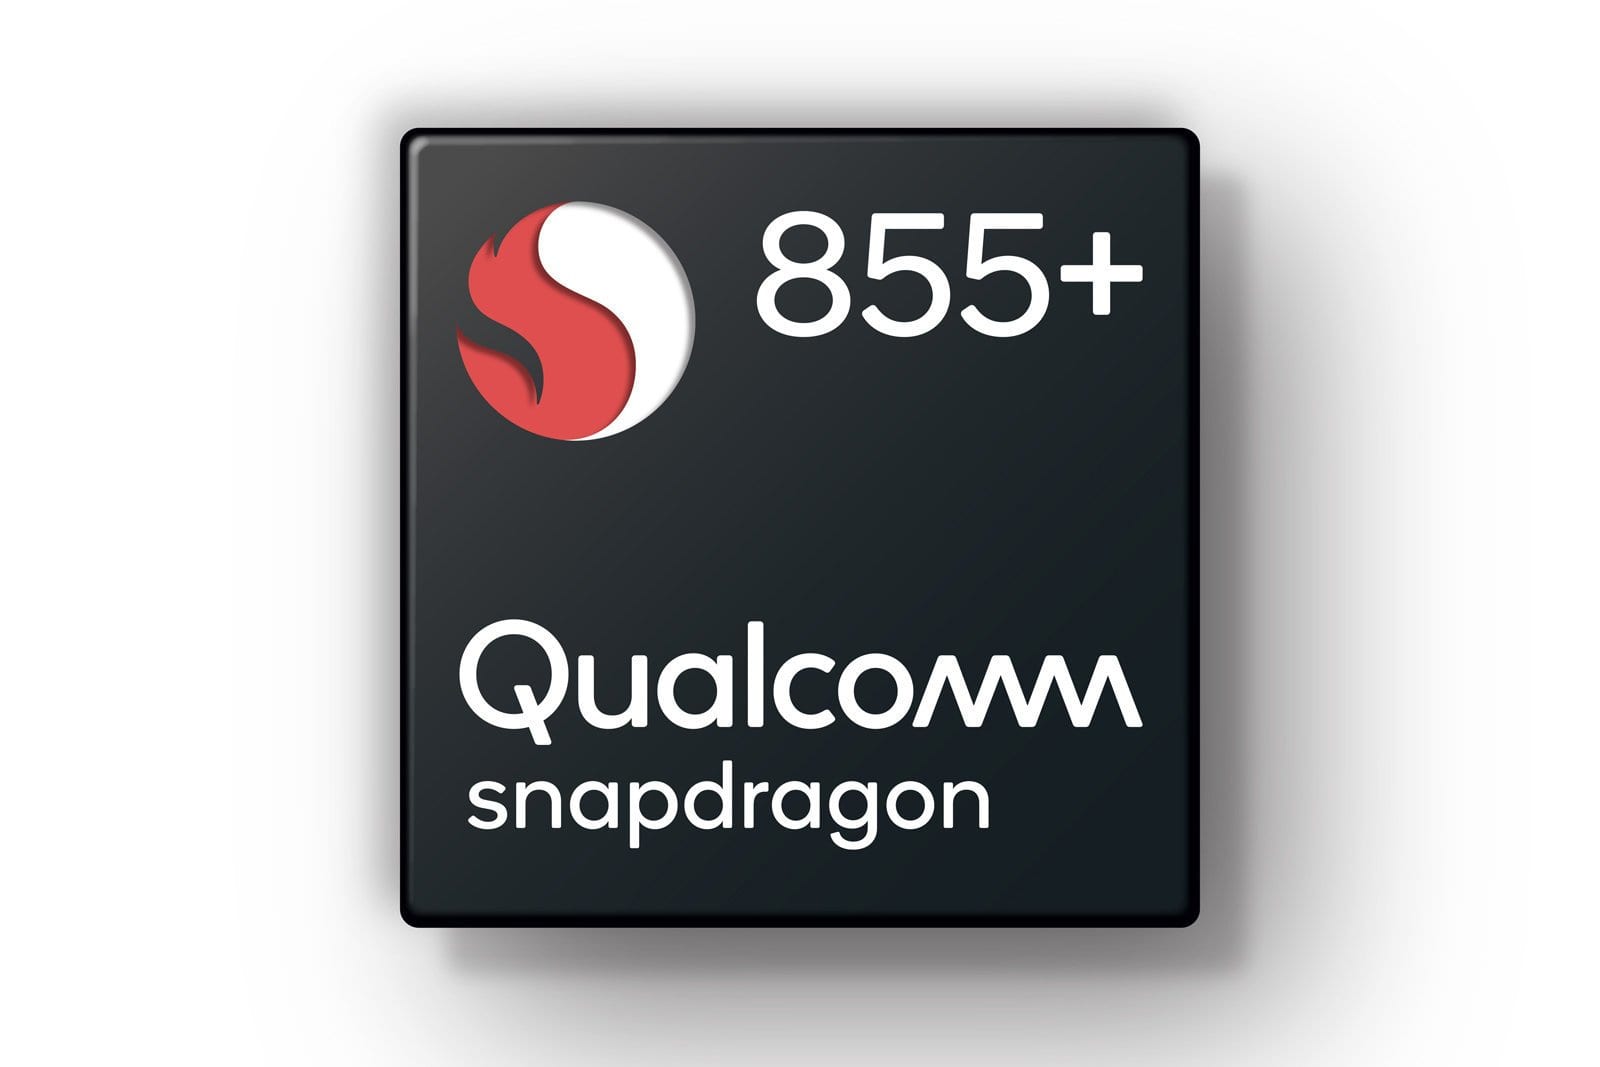 Qualcomm Snapdragon 855 Plus unveiled with 15% faster GPU than the previous gen